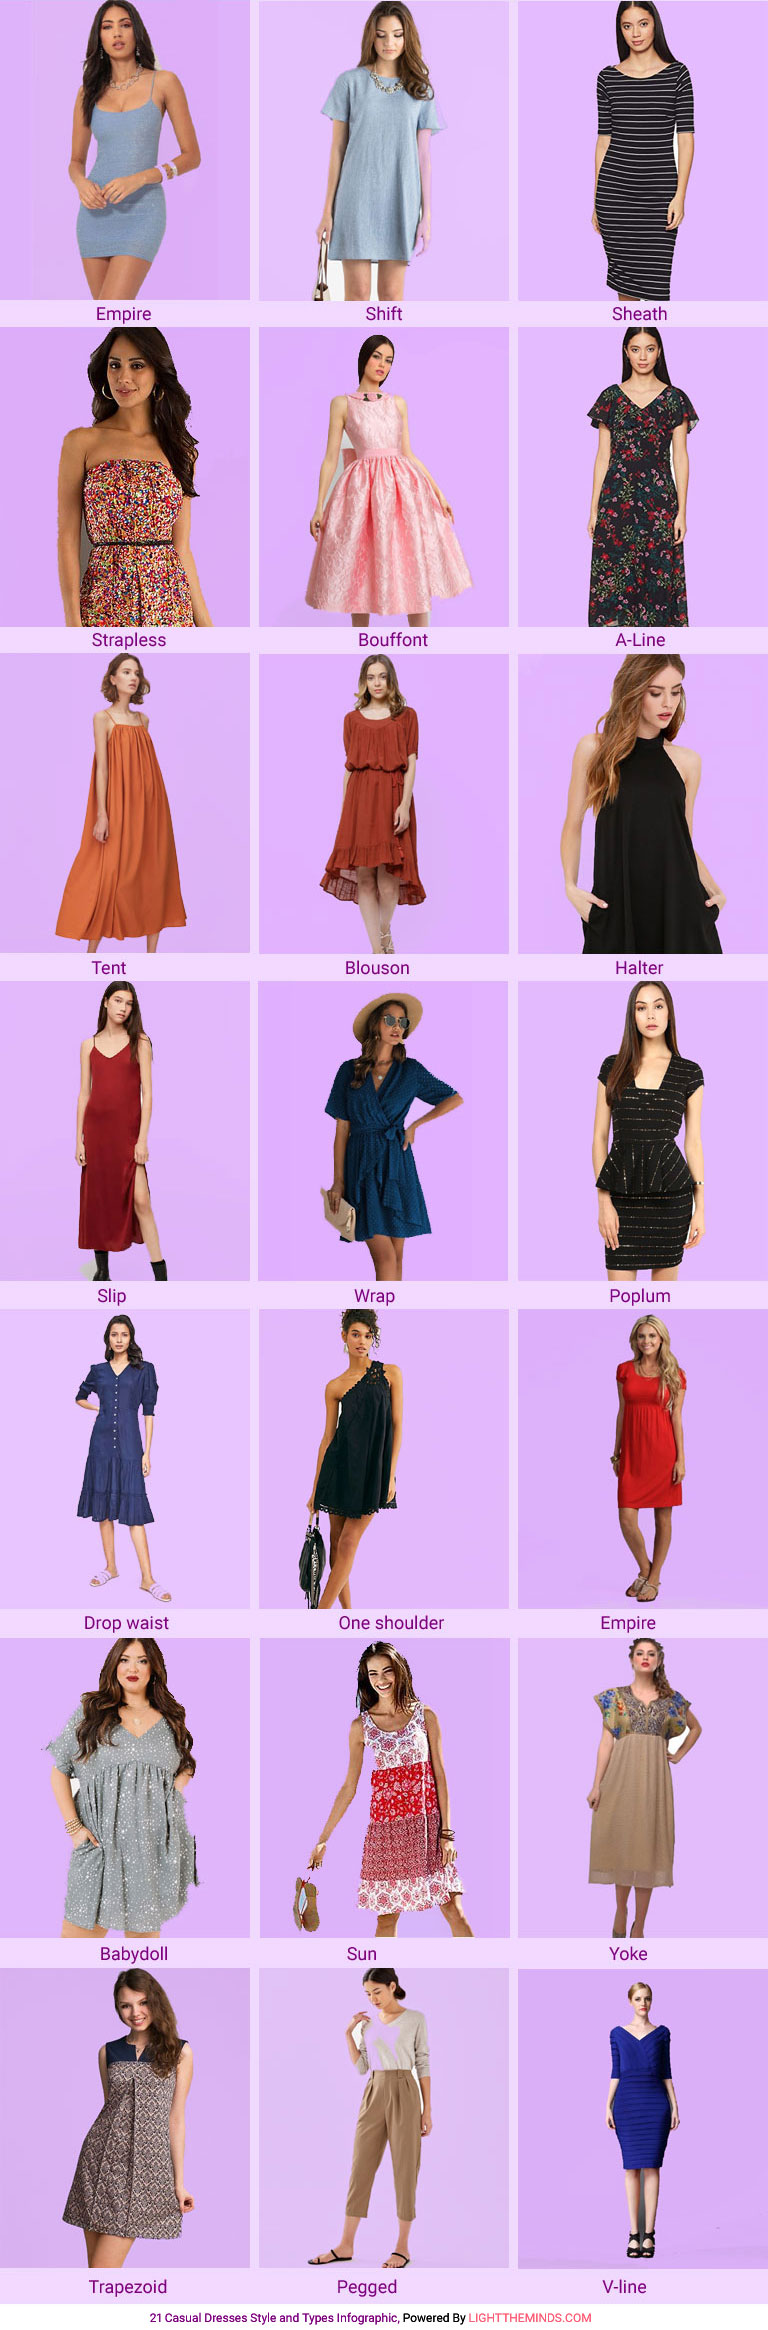 Top 21 Casual Dresses Style and Type for Women